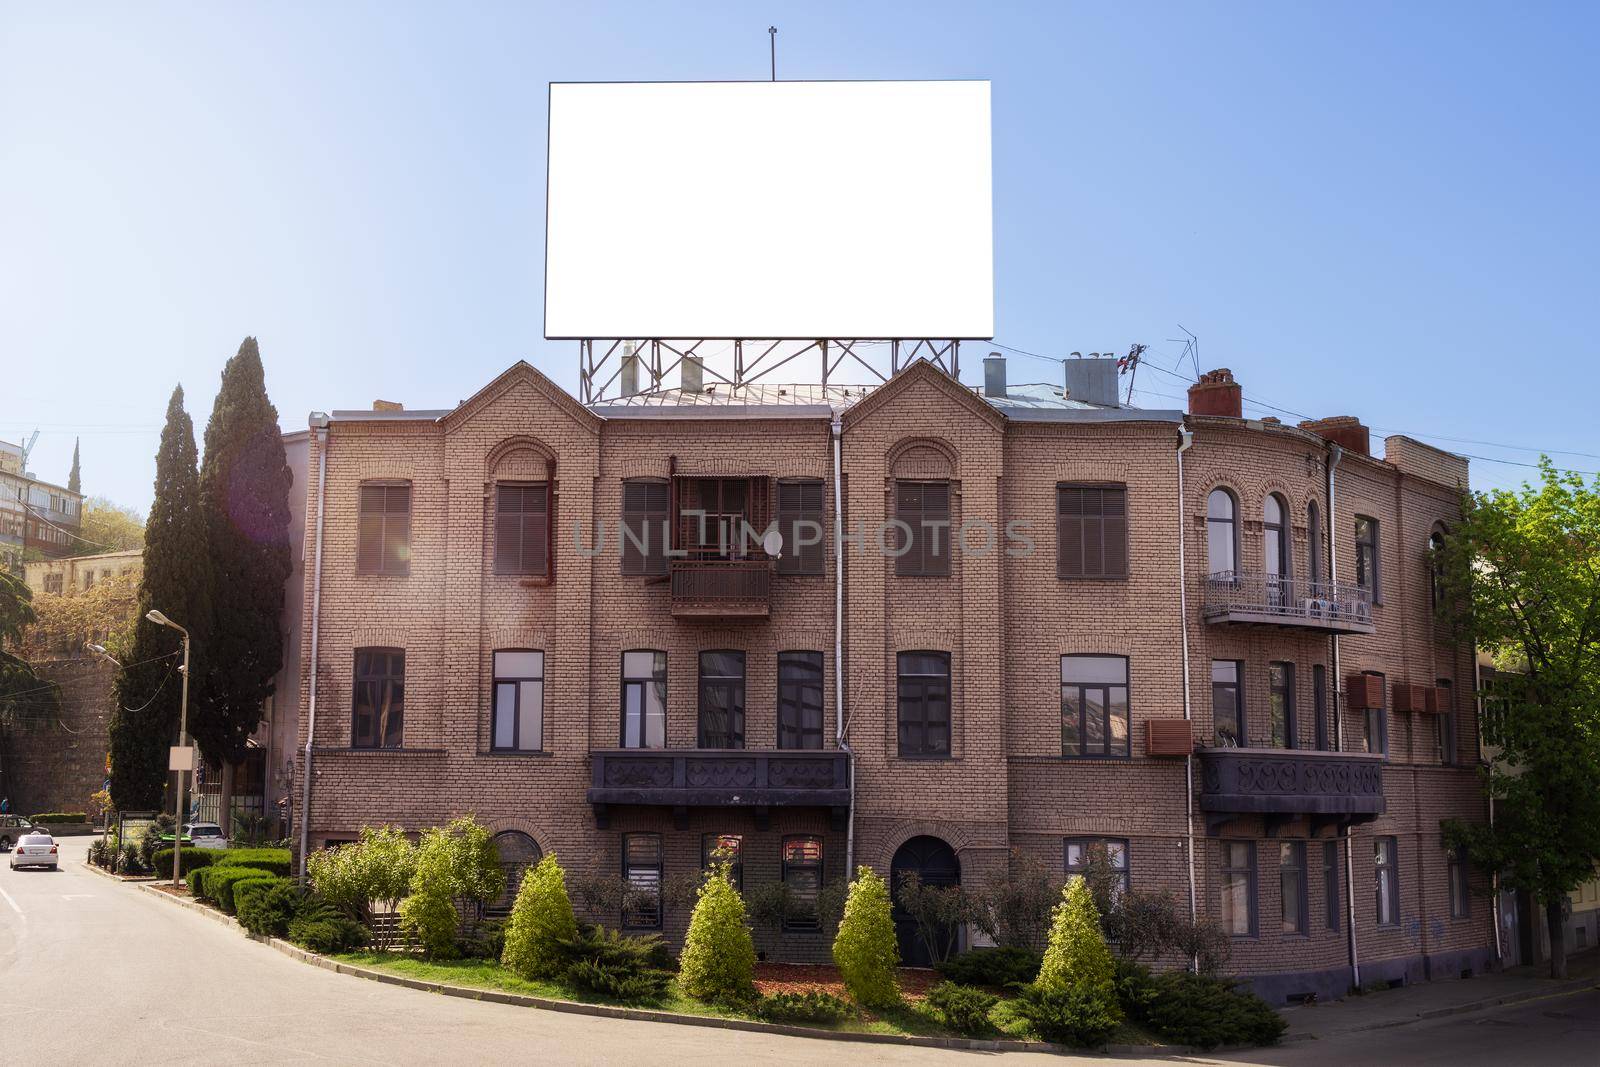 Mockup, template. Big, white, blank banner for your design and space for text. City landscape on a summer day. Large historical building and road in front of it, green trees and bushes